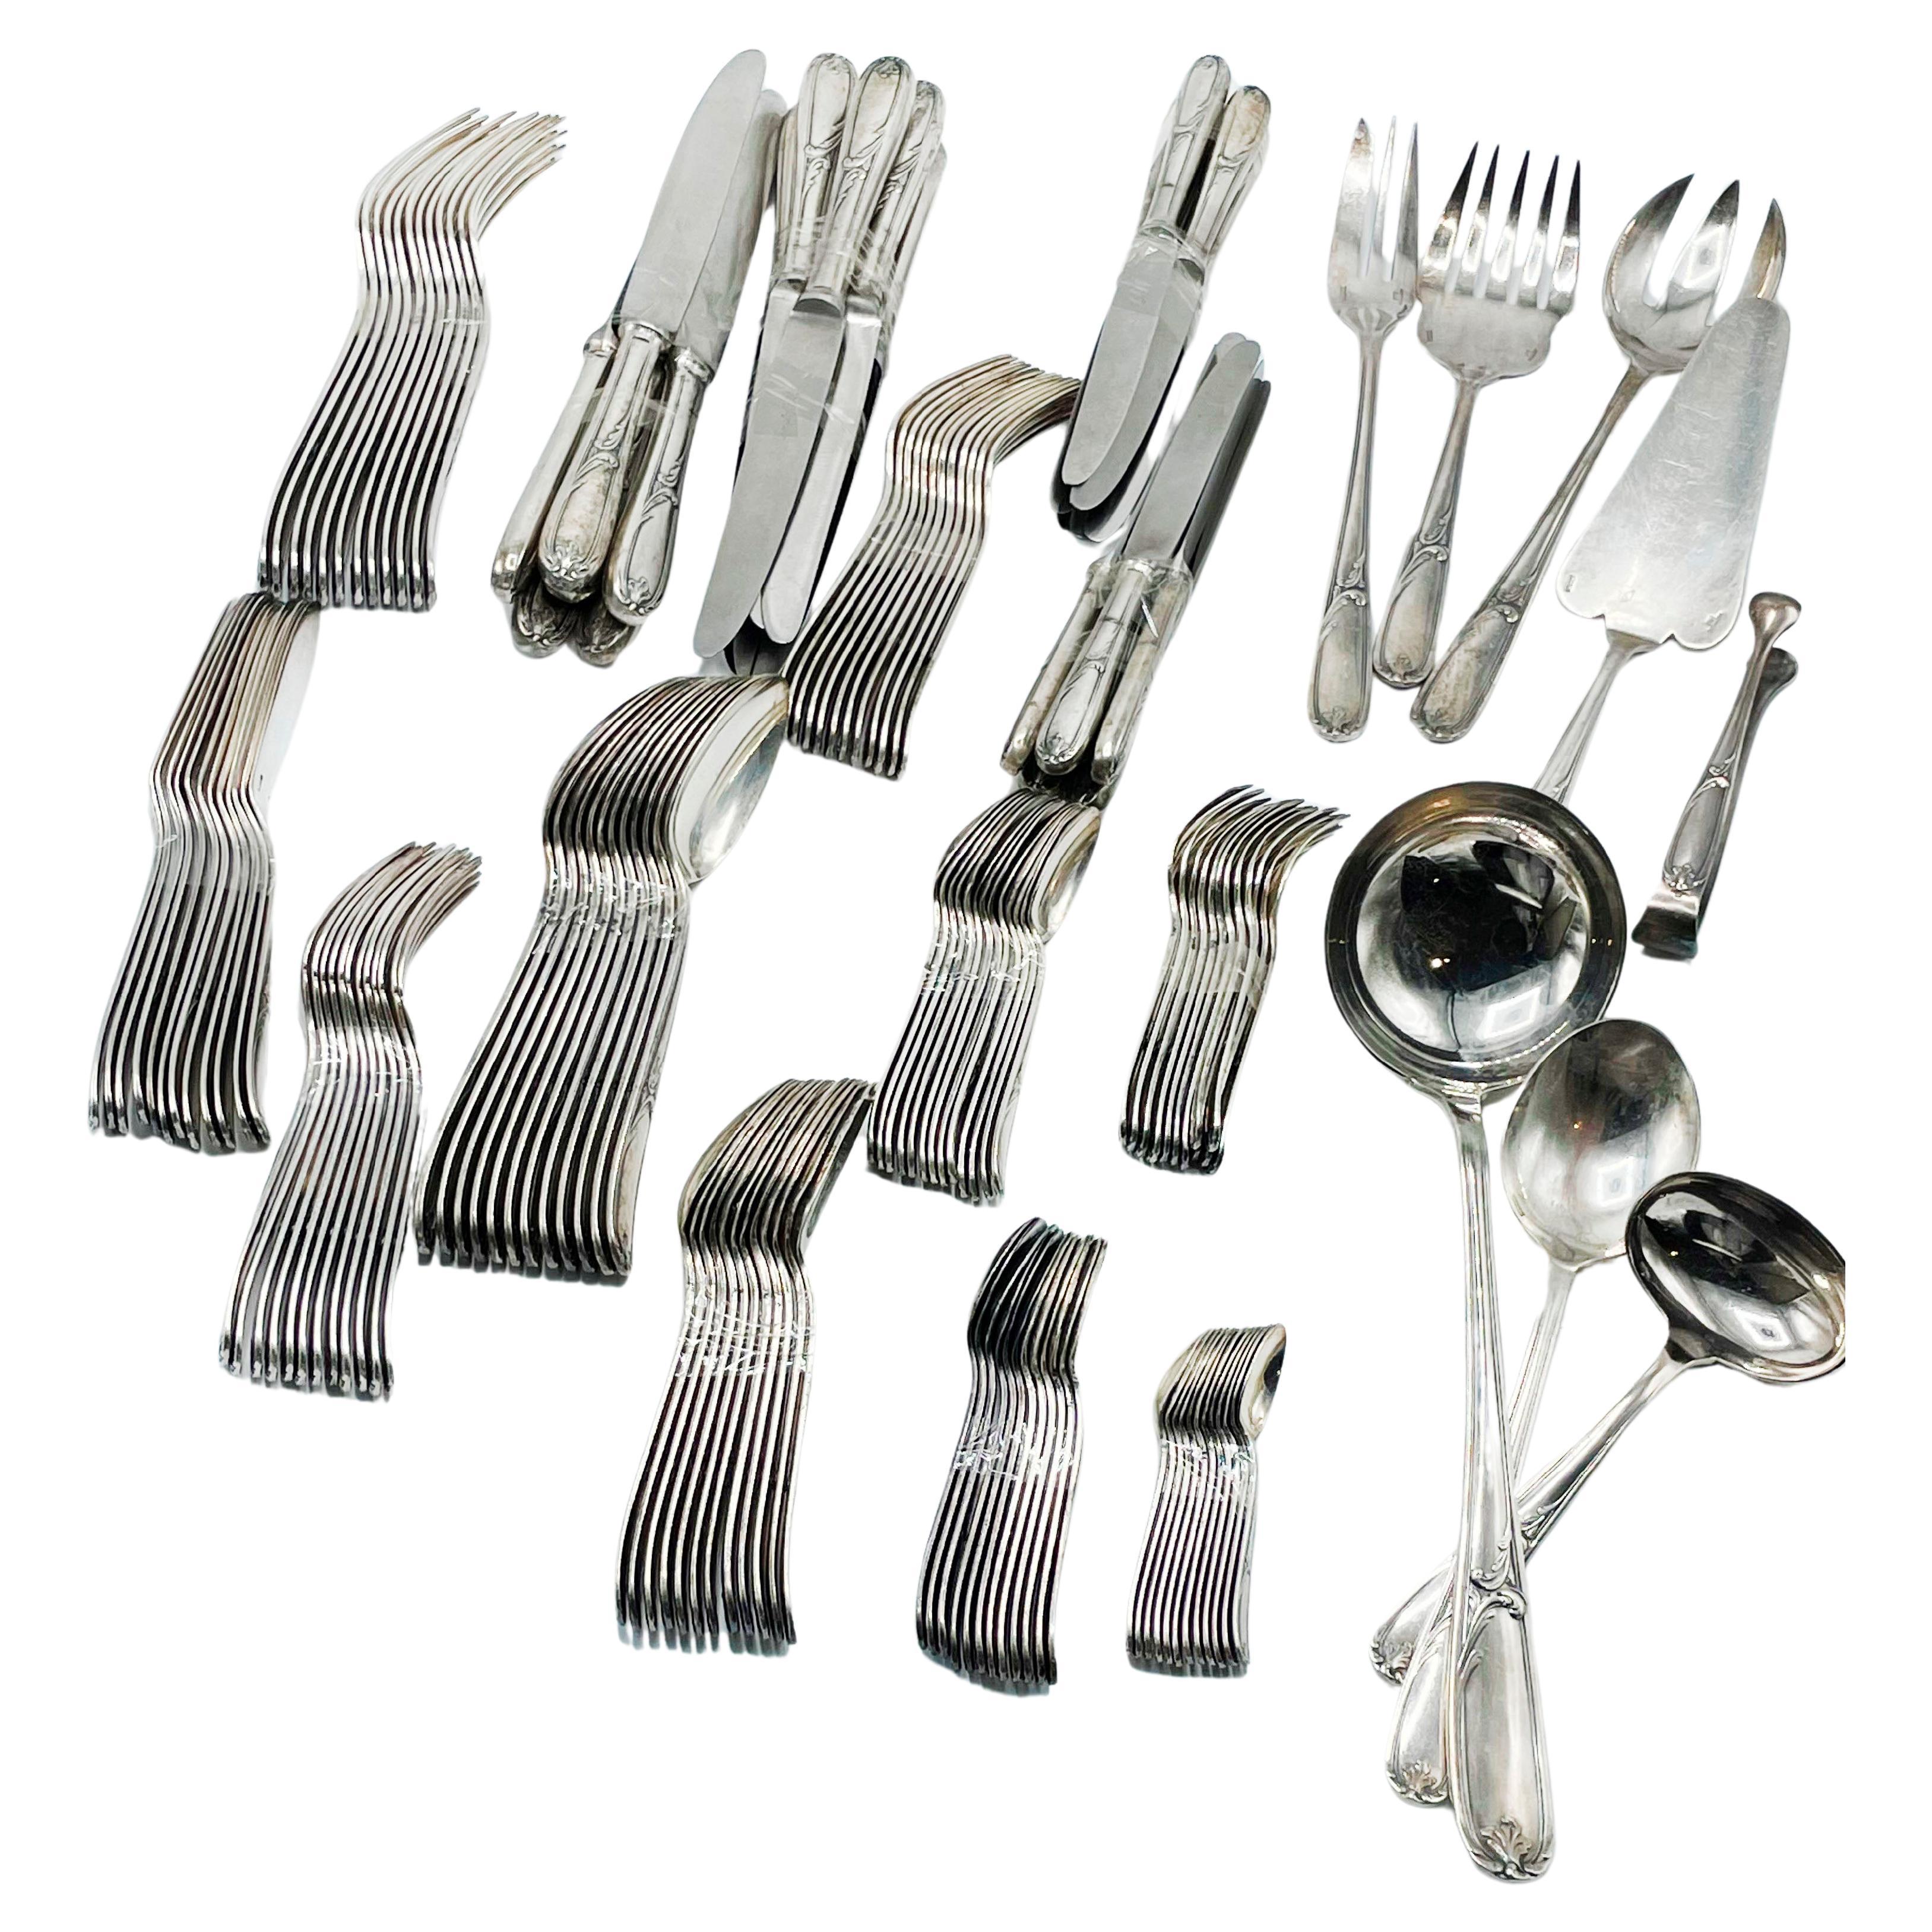 Christofle Made in Argentina, Flatware art nouveau in Silverplated